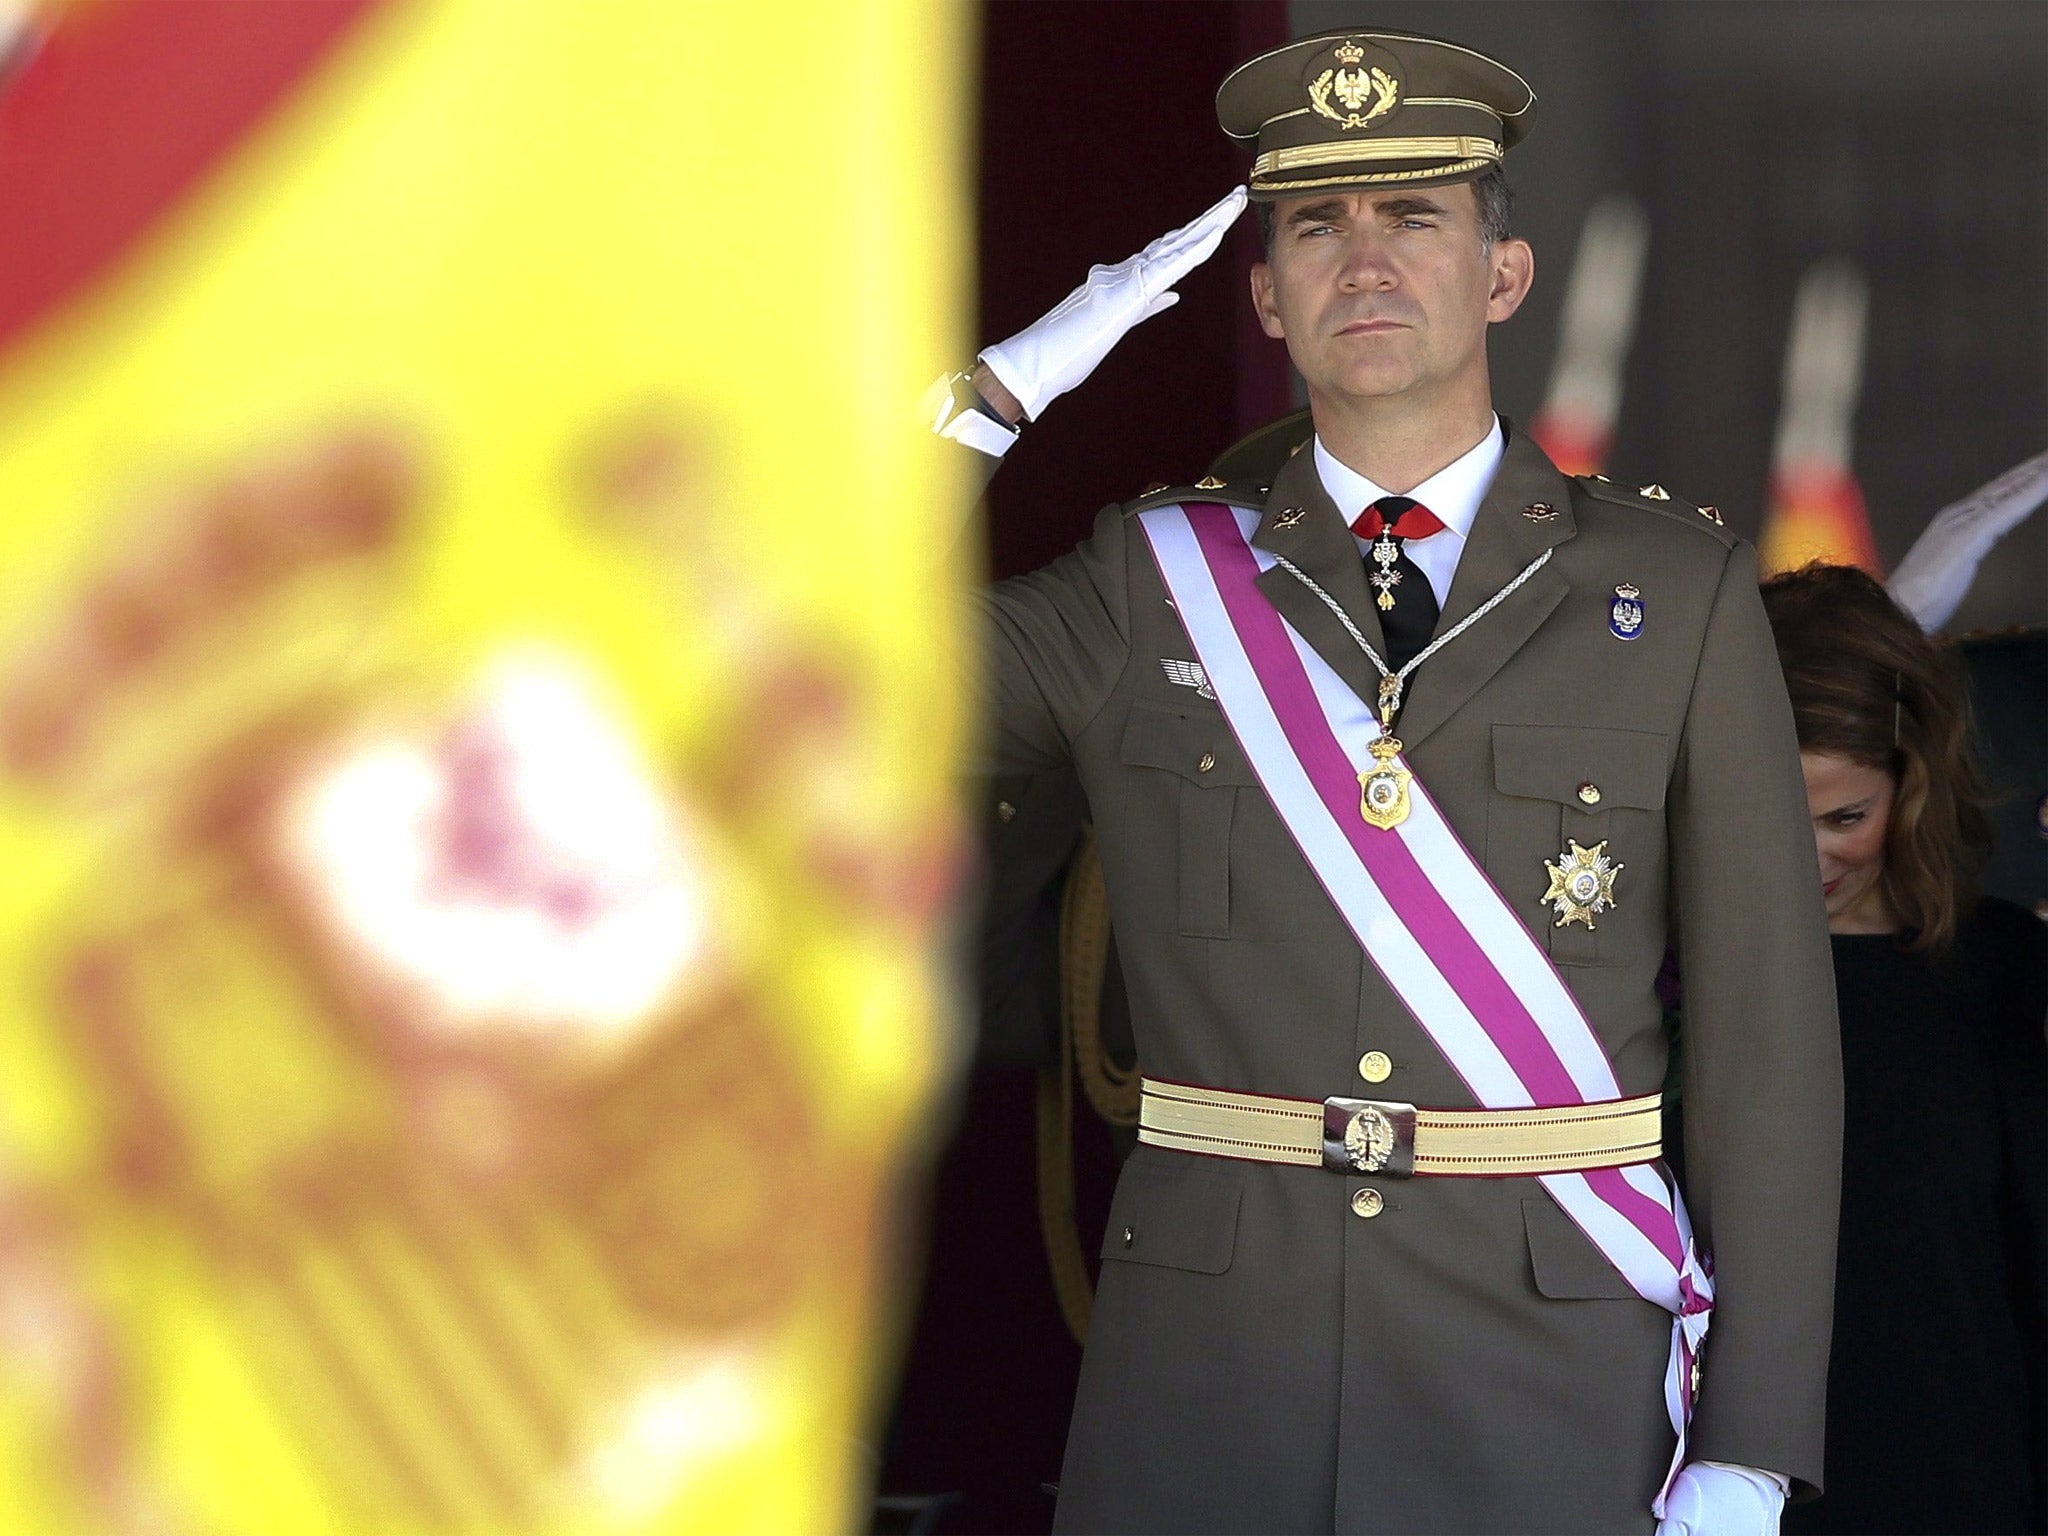 Spanish Crown Prince Felipe salutes at the national flag during a military ceremony of the San Hermenegildo Order